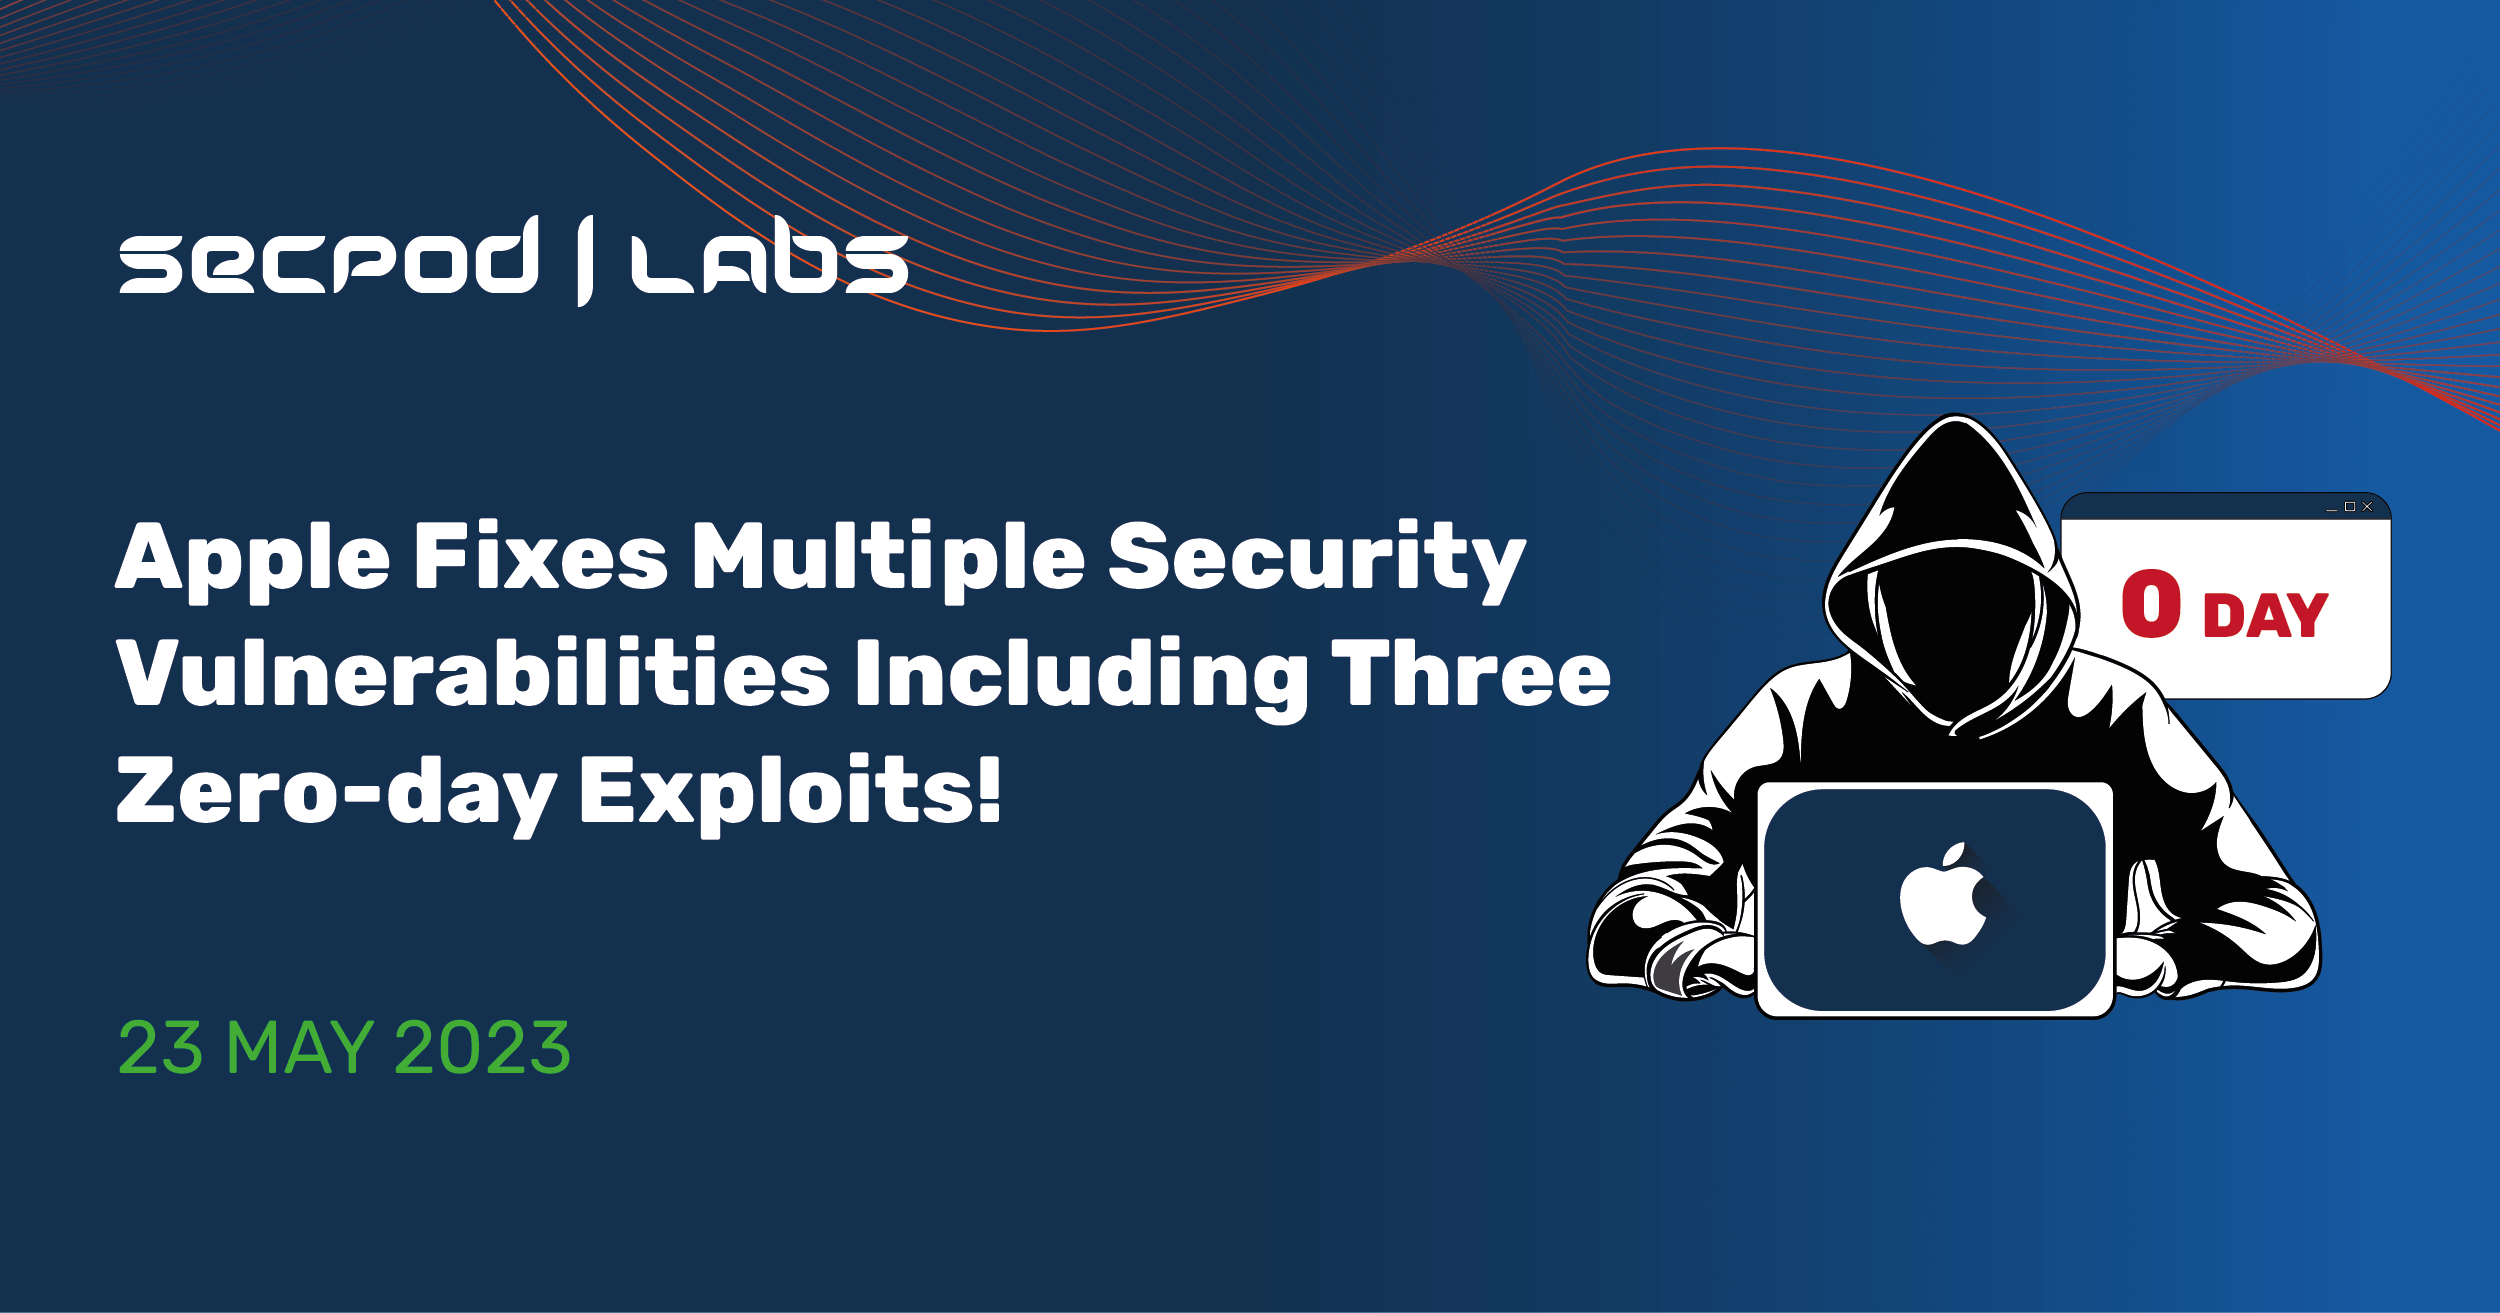 You are currently viewing Apple Fixes Multiple Security Vulnerabilities Including Three Zero-day Exploits!